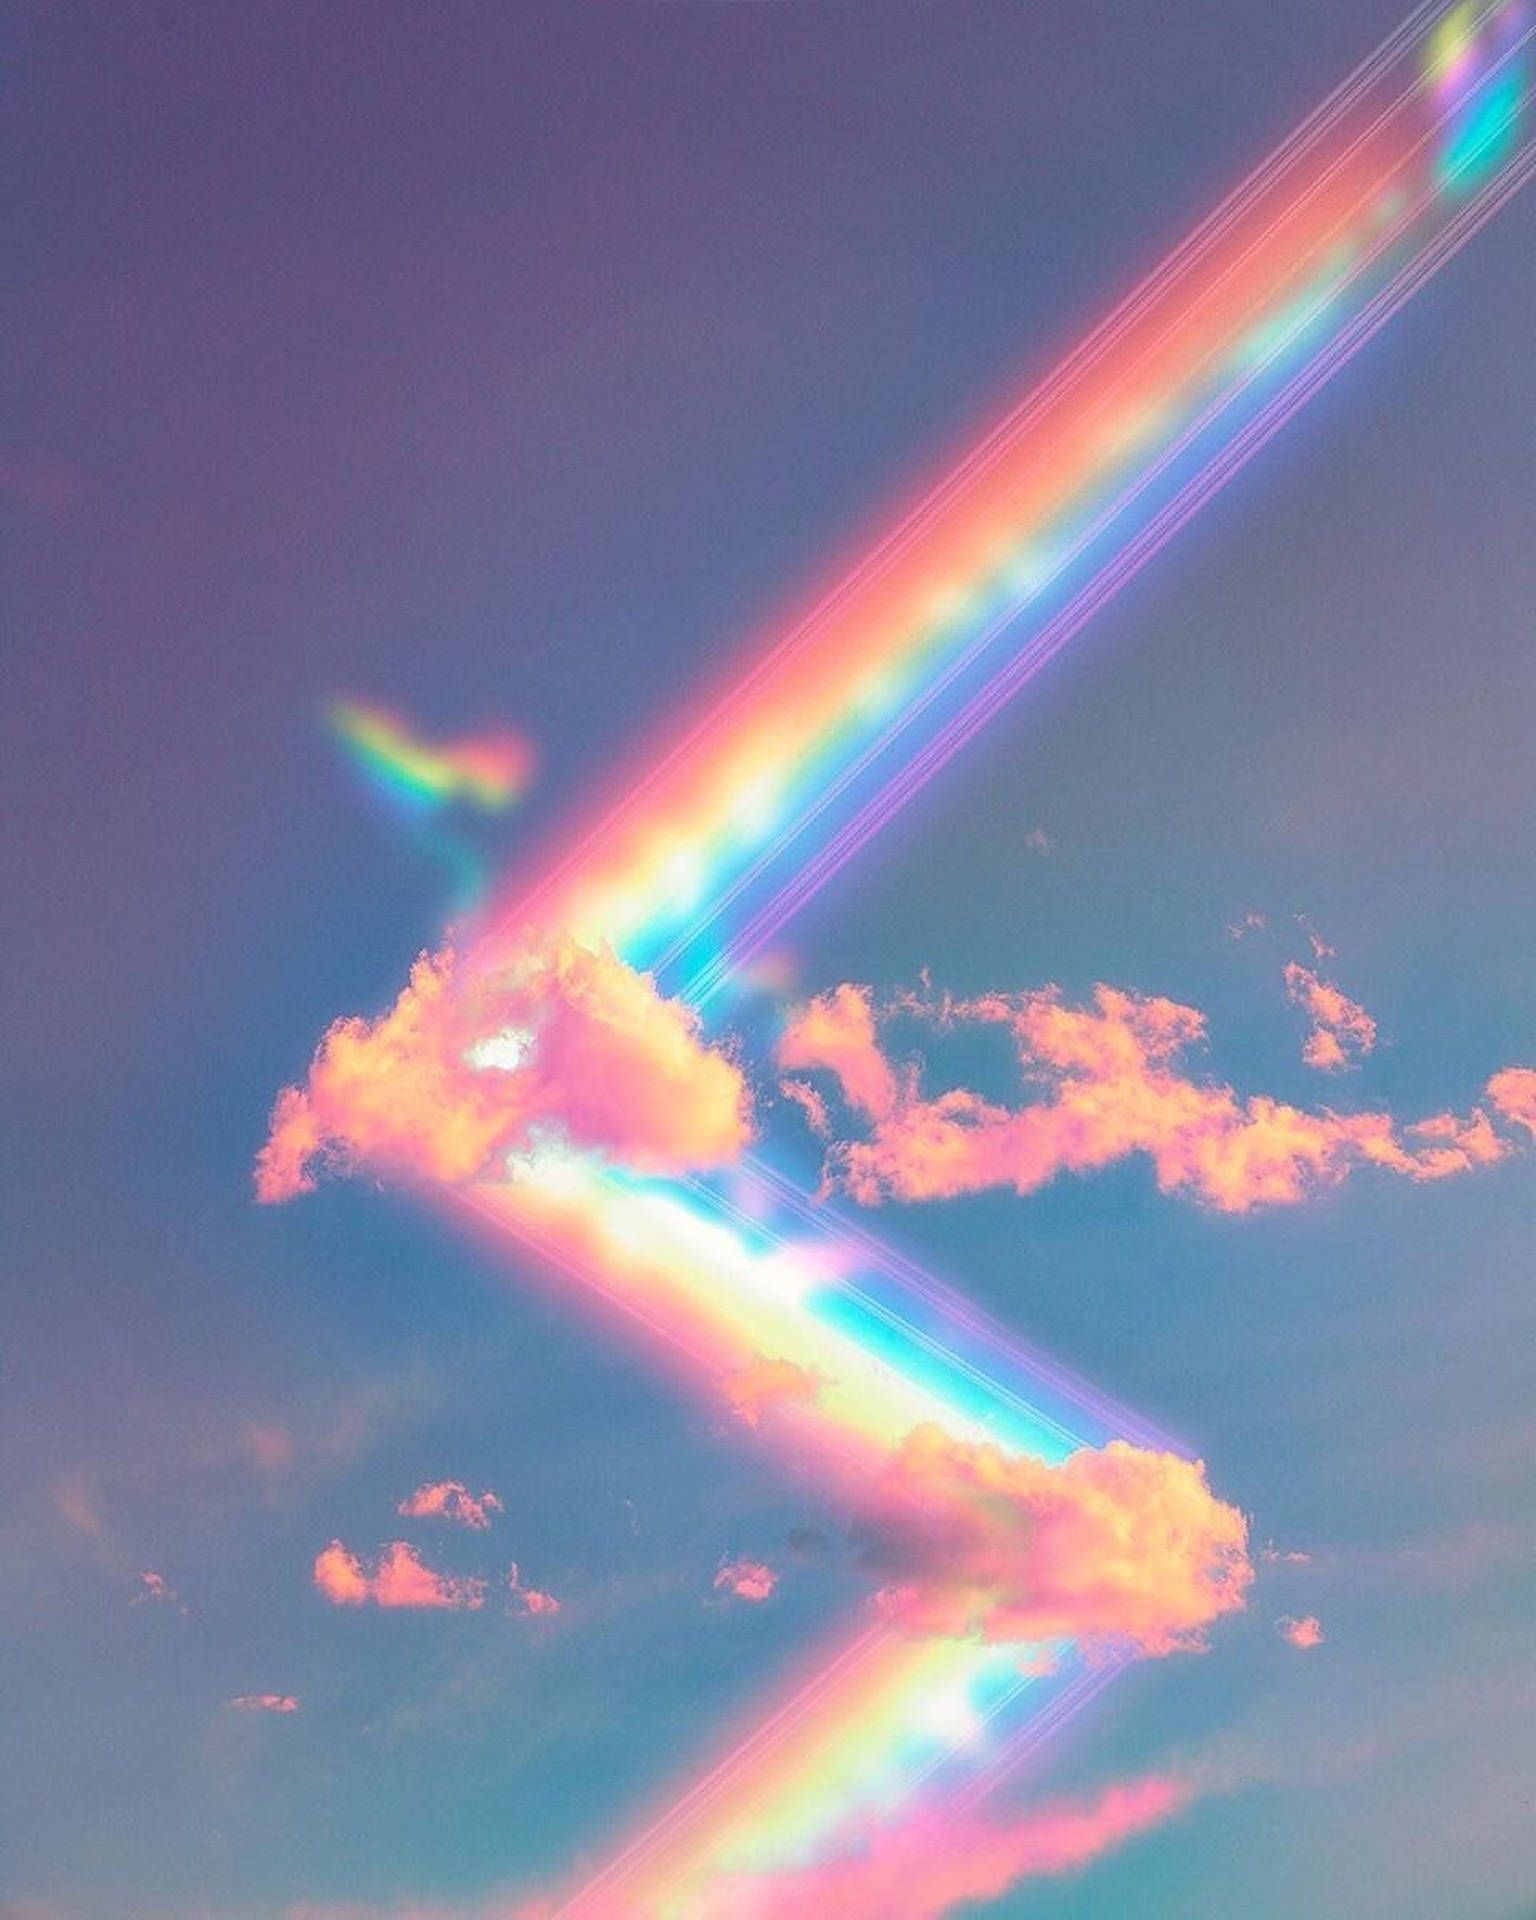 A rainbow in the sky with clouds - Rainbows, pastel rainbow